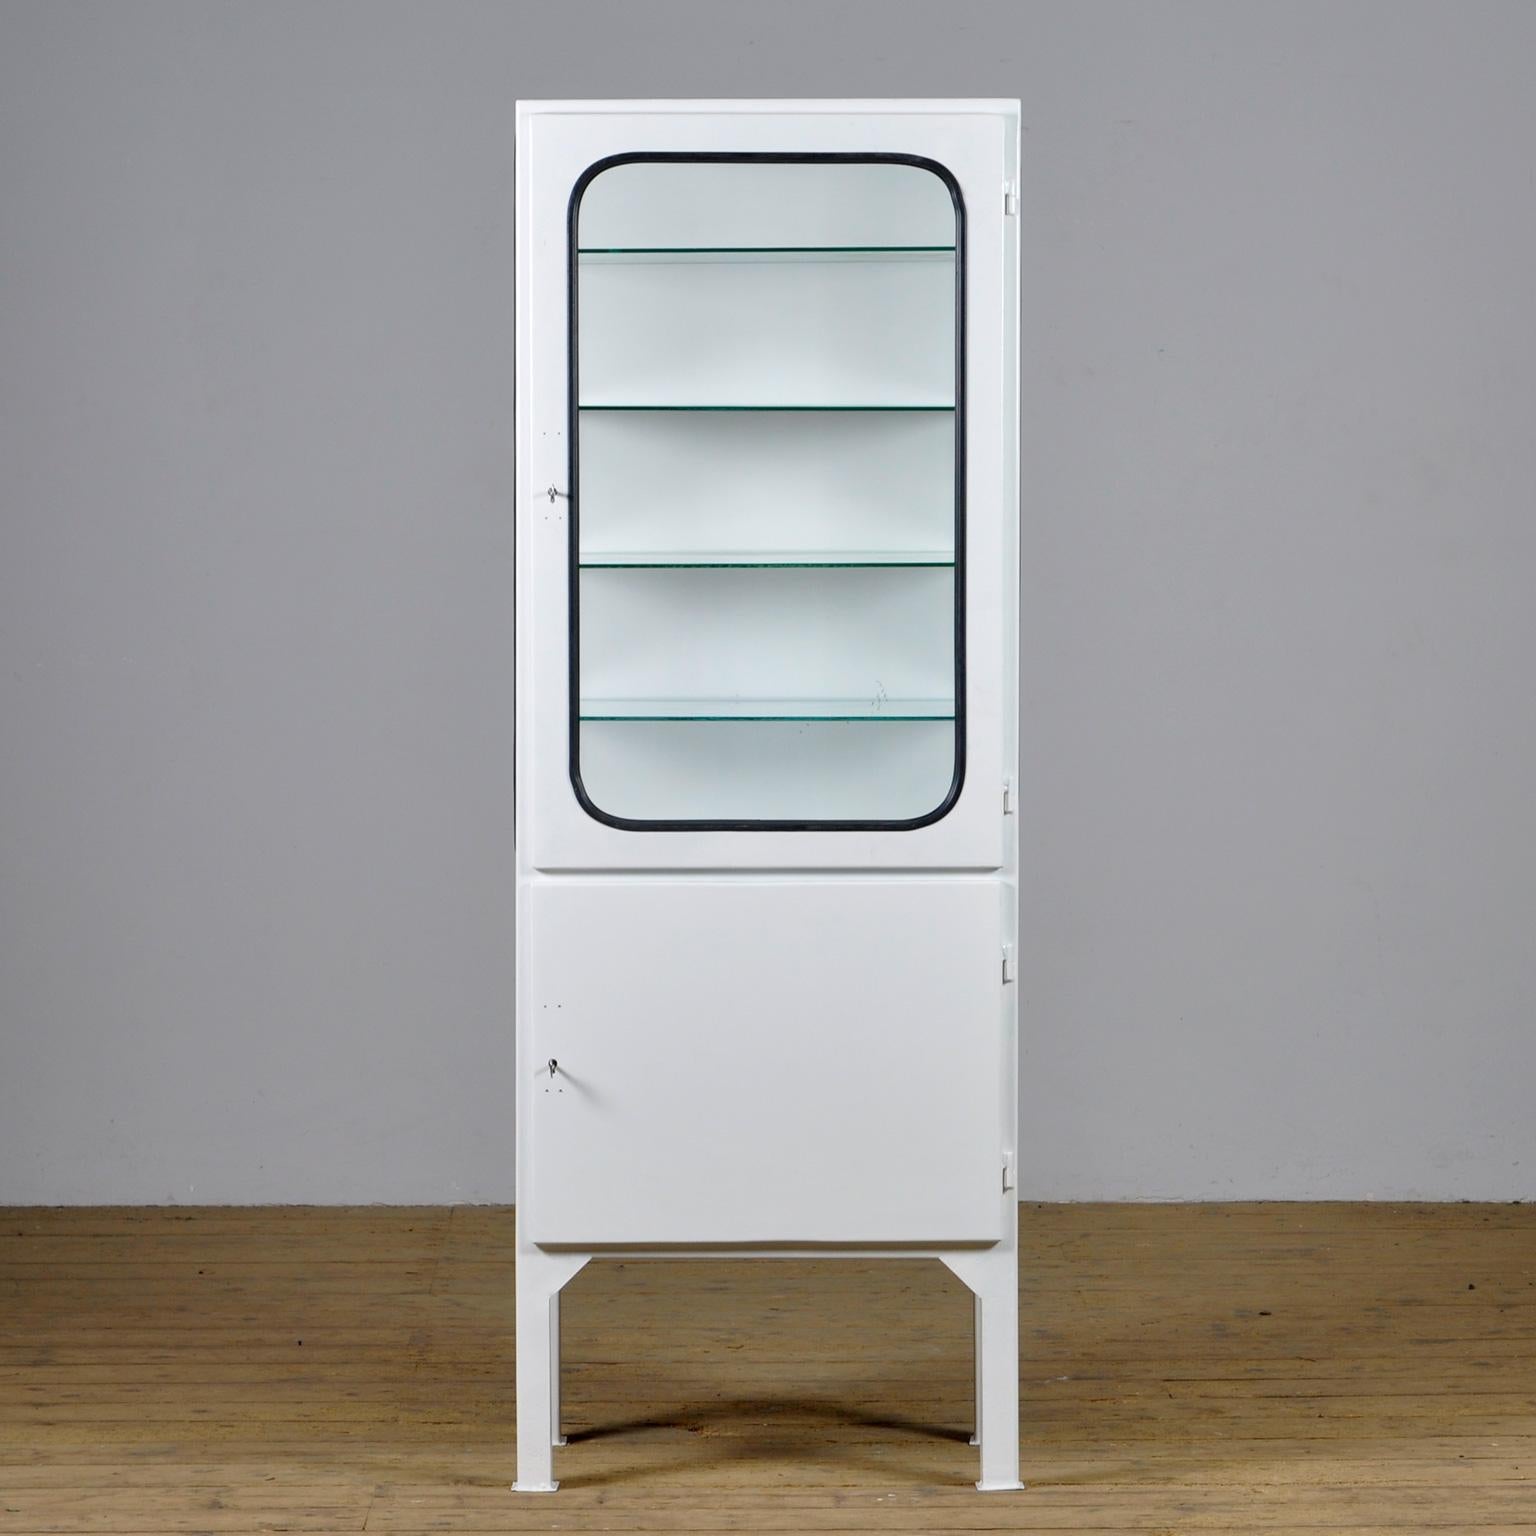 This medical cabinet was designed in the 1970s and was produced circa 1975 in hungary. It is made from iron and glass with new glass shelves. The glass is held by a black rubber strip. The cabinet features two adjustable glass shelves and a